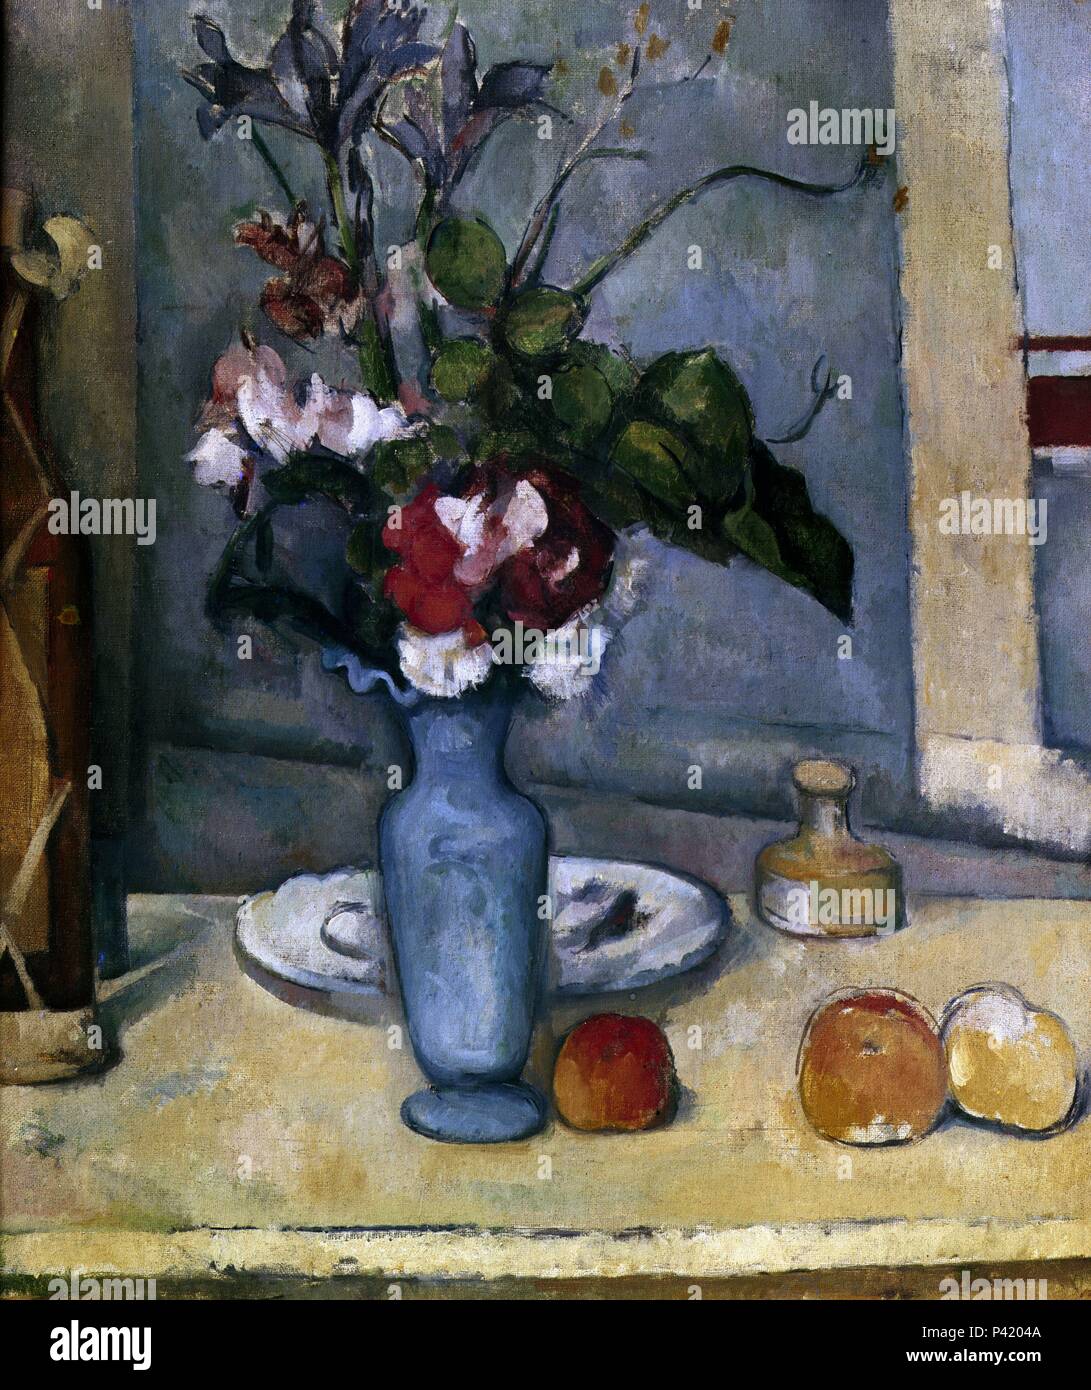 The Blue Vase - 1885/87 - 62x51 cm - oil on canvas - French Post-Impressionism. Author: Paul Cézanne (1839-1906). Location: MUSEE D'ORSAY, FRANCE. Also known as: EL VASO AZUL. Stock Photo